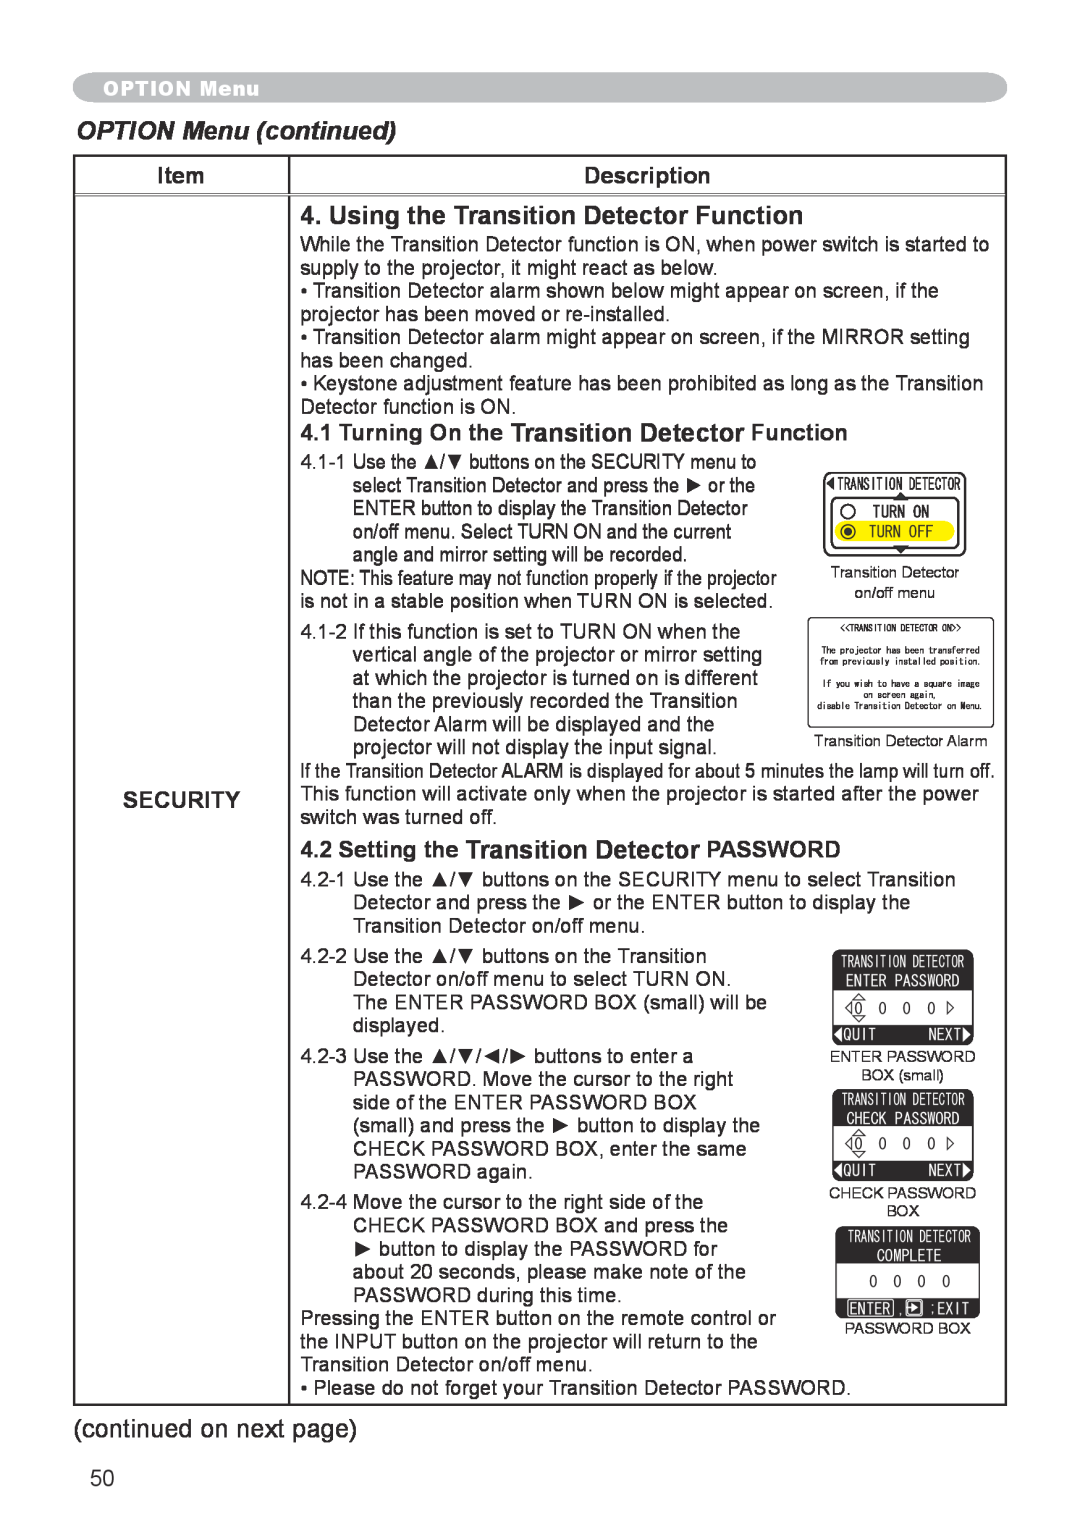 Hitachi CP-X600 user manual Using the Transition Detector Function, OPTION Menu continued, Description, Security 